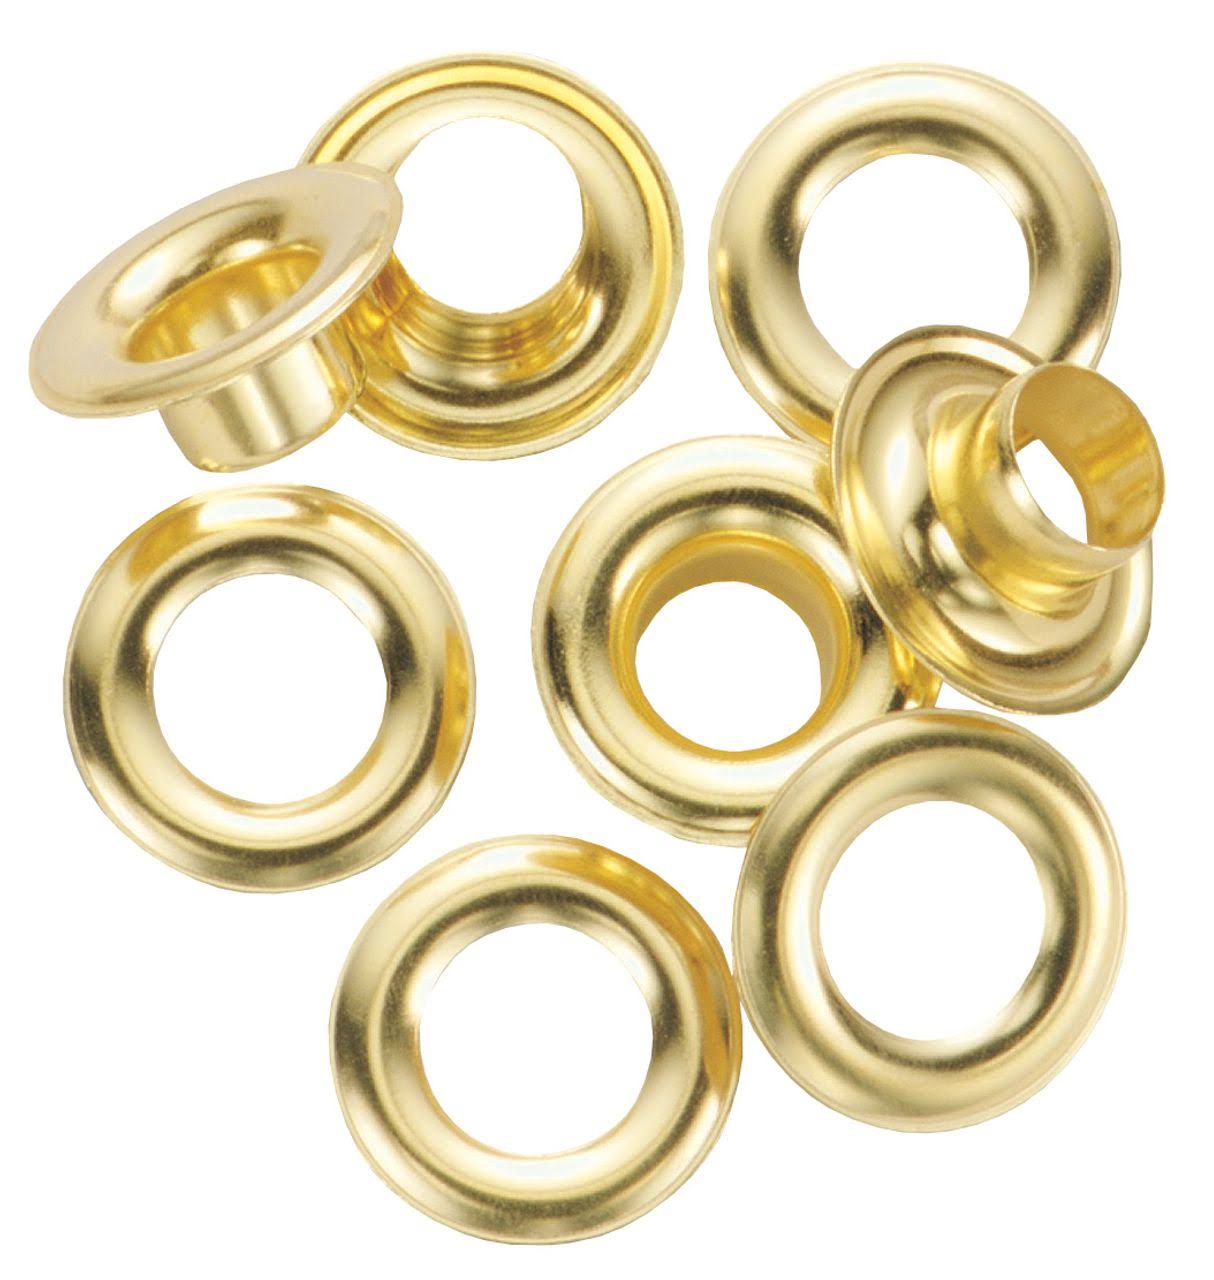 General Tools and Instruments Refill - with 24 Grommets, 1/2"